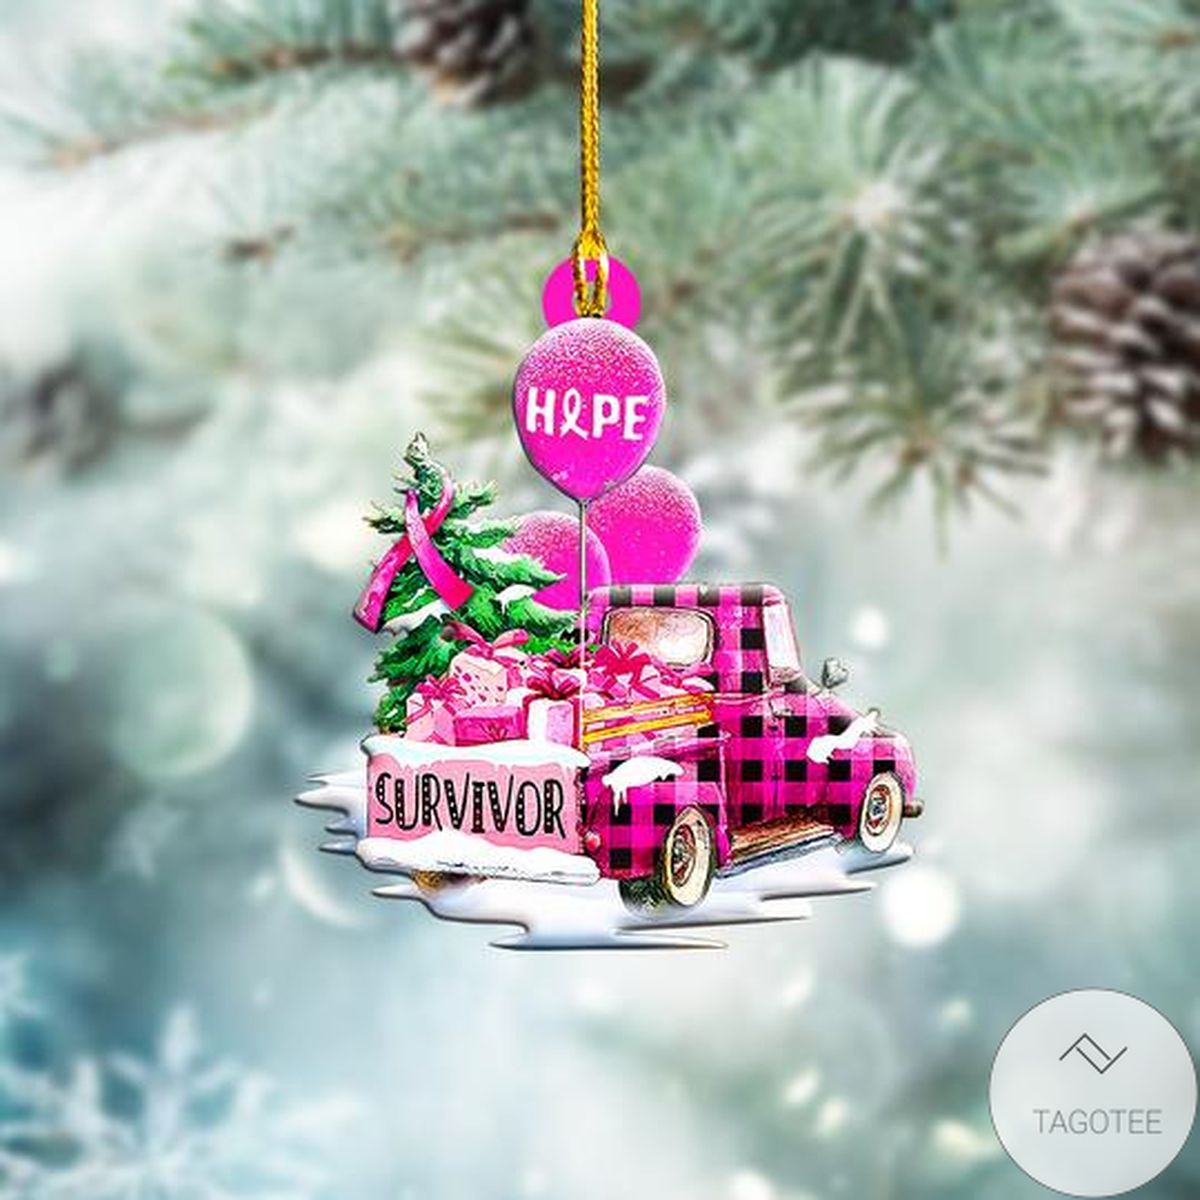 Breast Cancer Awareness Christmas Ornament